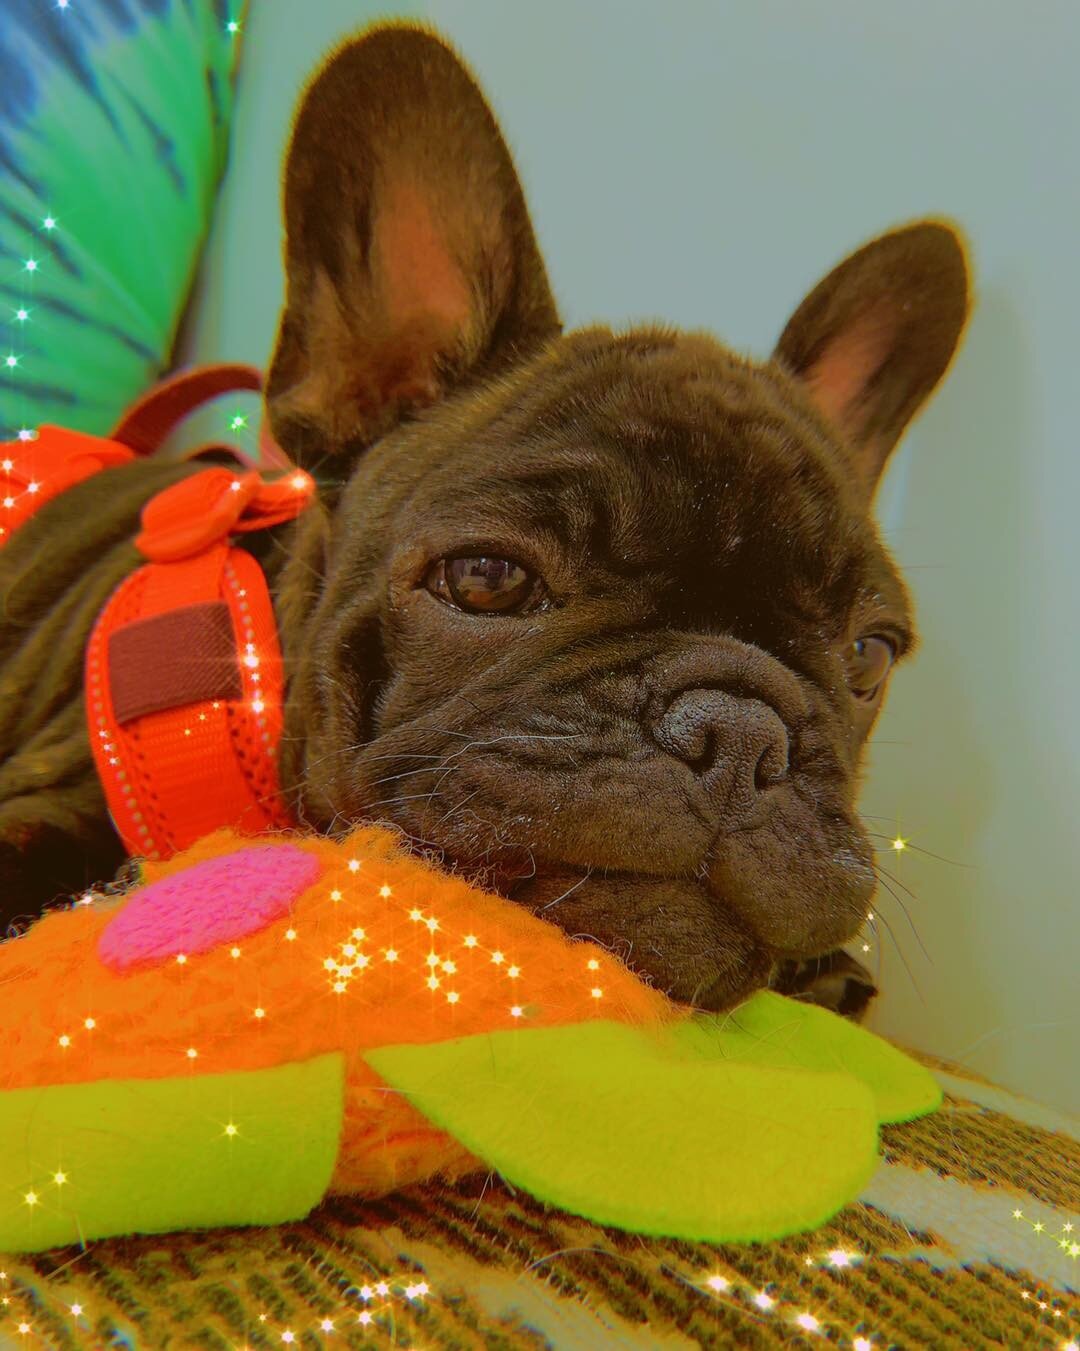 Missing the sun? ☀️Your not the only one! Nugget is snuggling up to his sunshine toy in hope it will scare away the rain 🌧  Who can be gloomy when you have cute faces like this to love up 😍 Rainy days are just better for snuggling!  What&rsquo;s yo